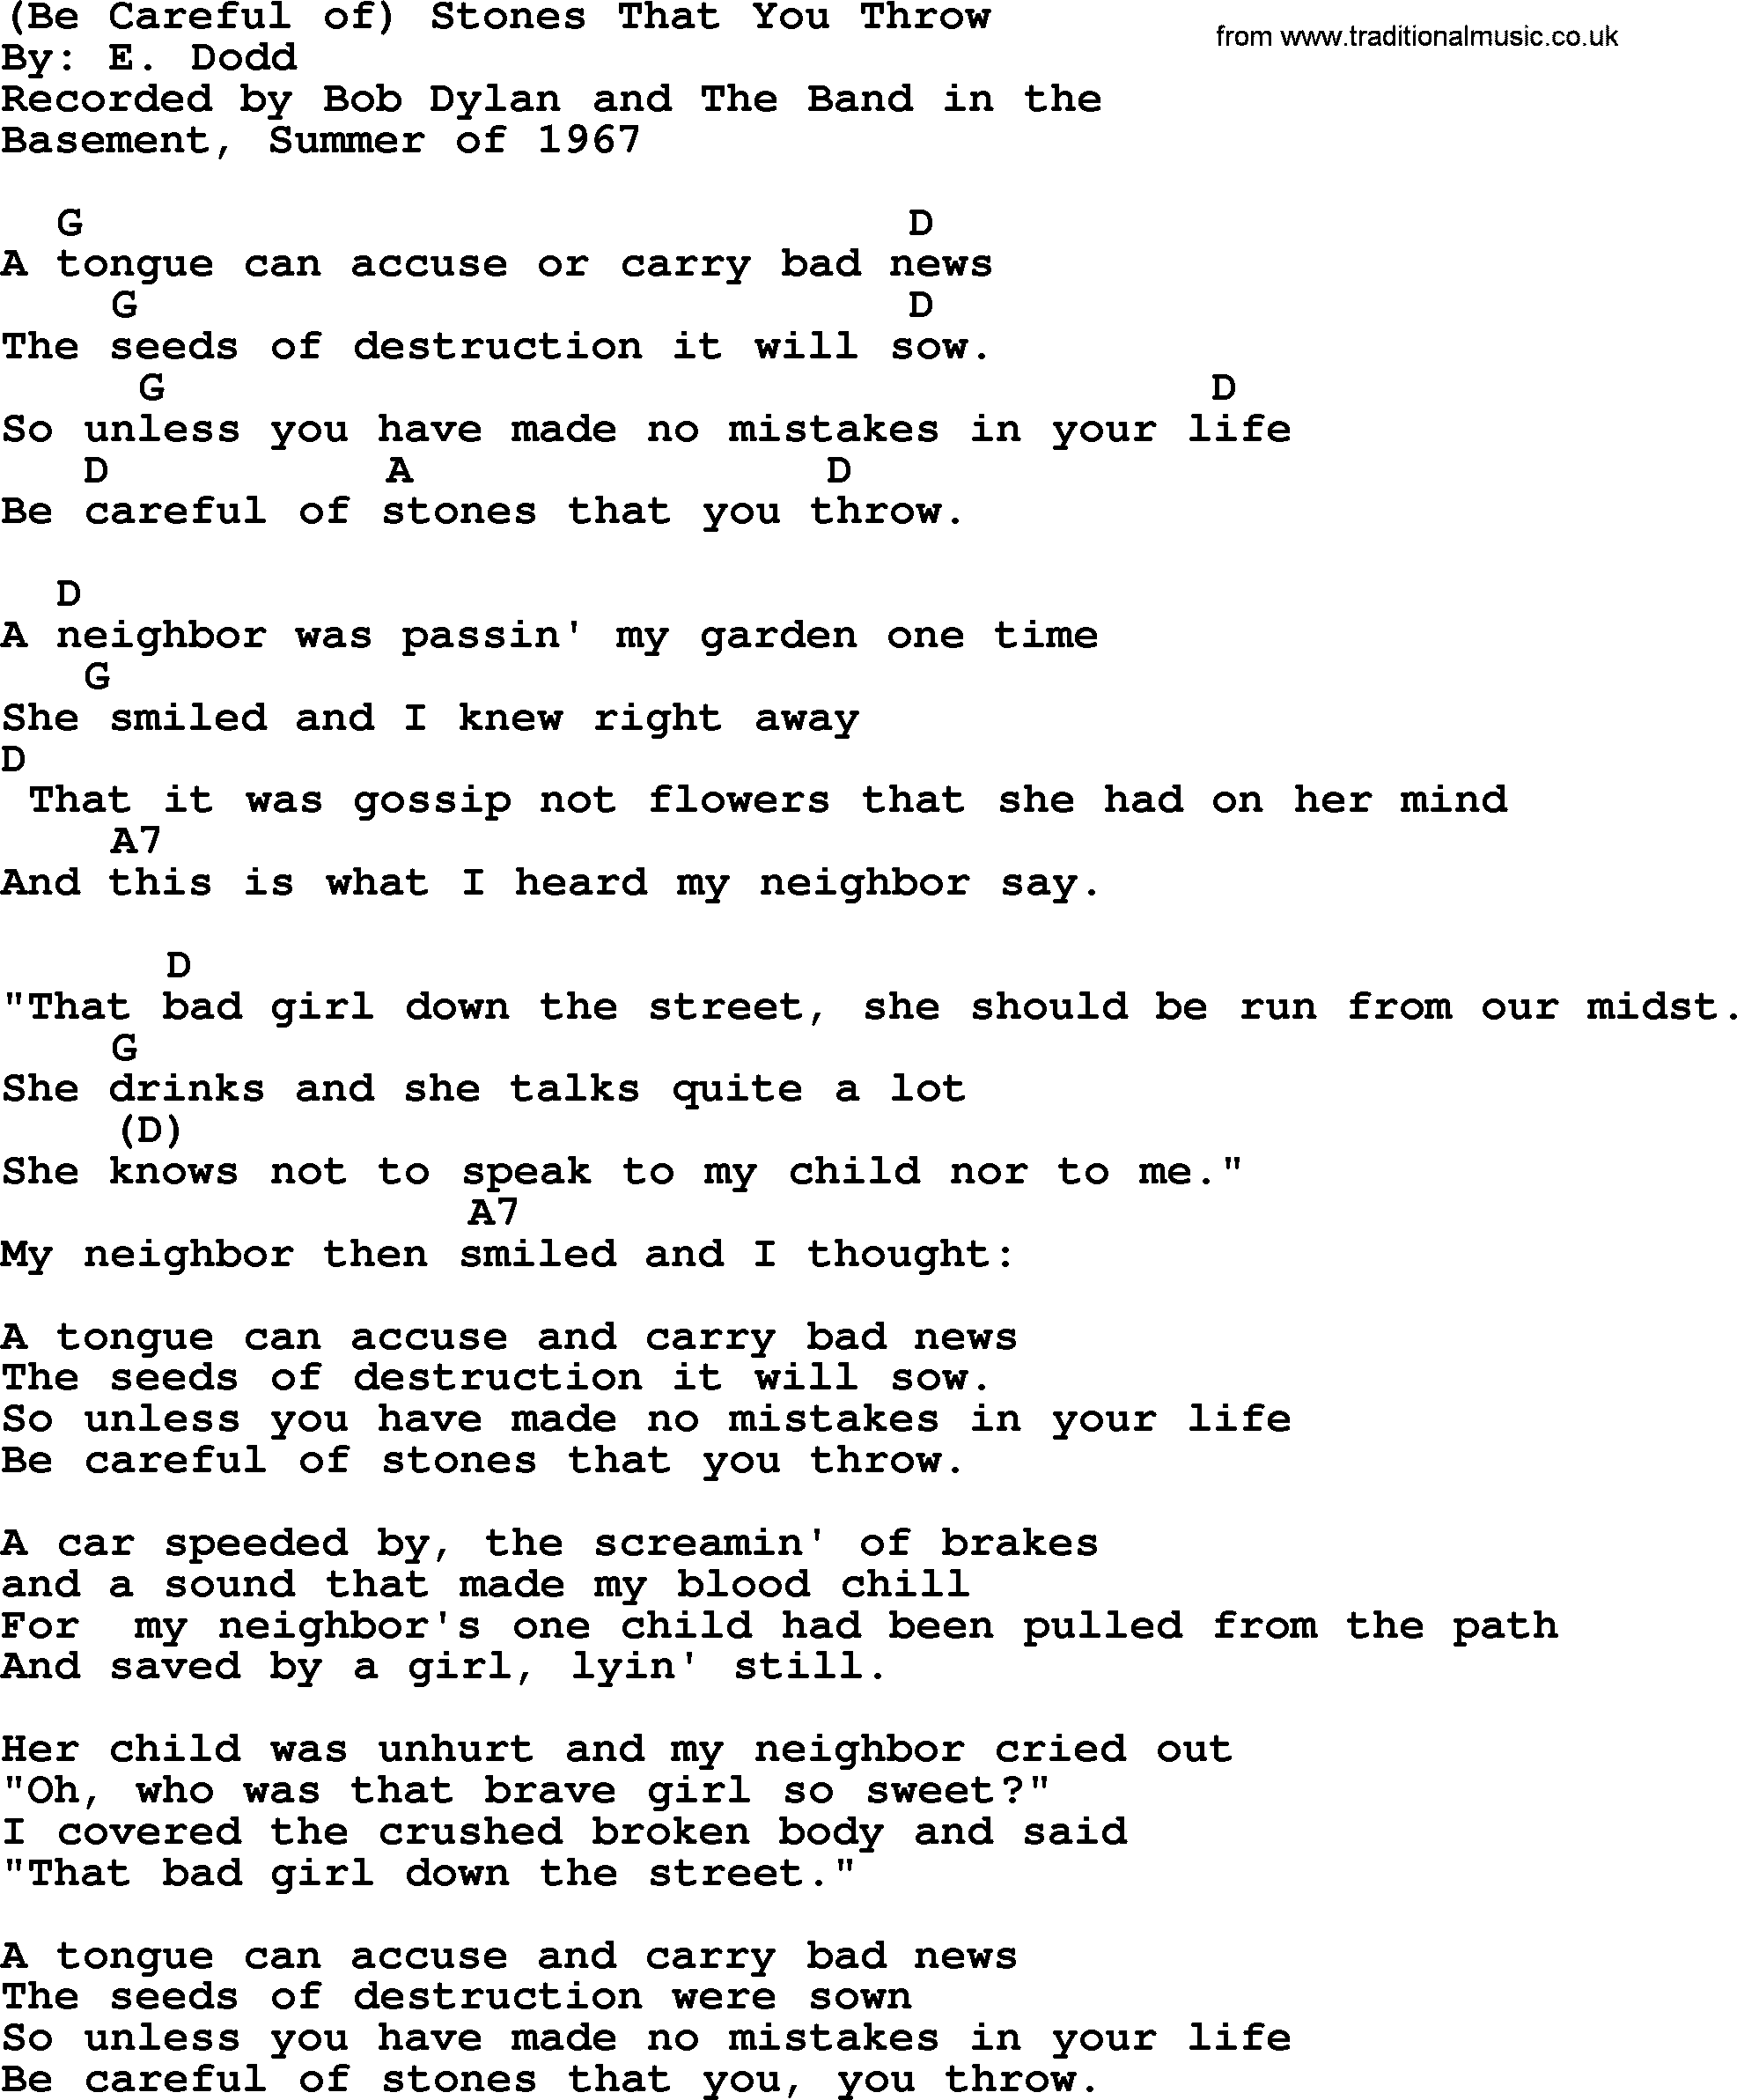 Bob Dylan song, lyrics with chords - (Be Careful of) Stones That You Throw